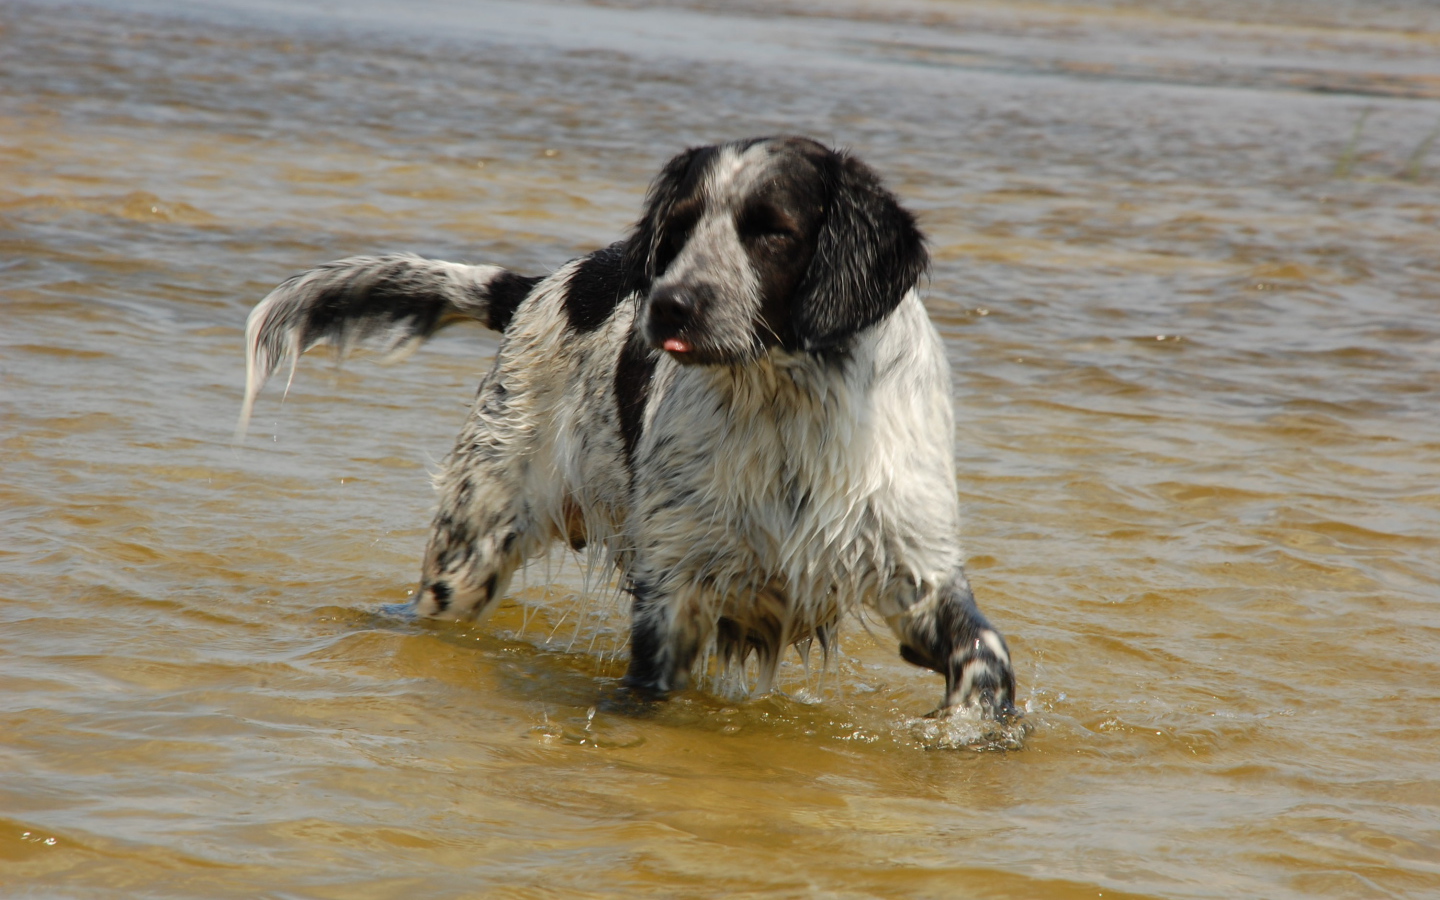 Spaniel playing in the water